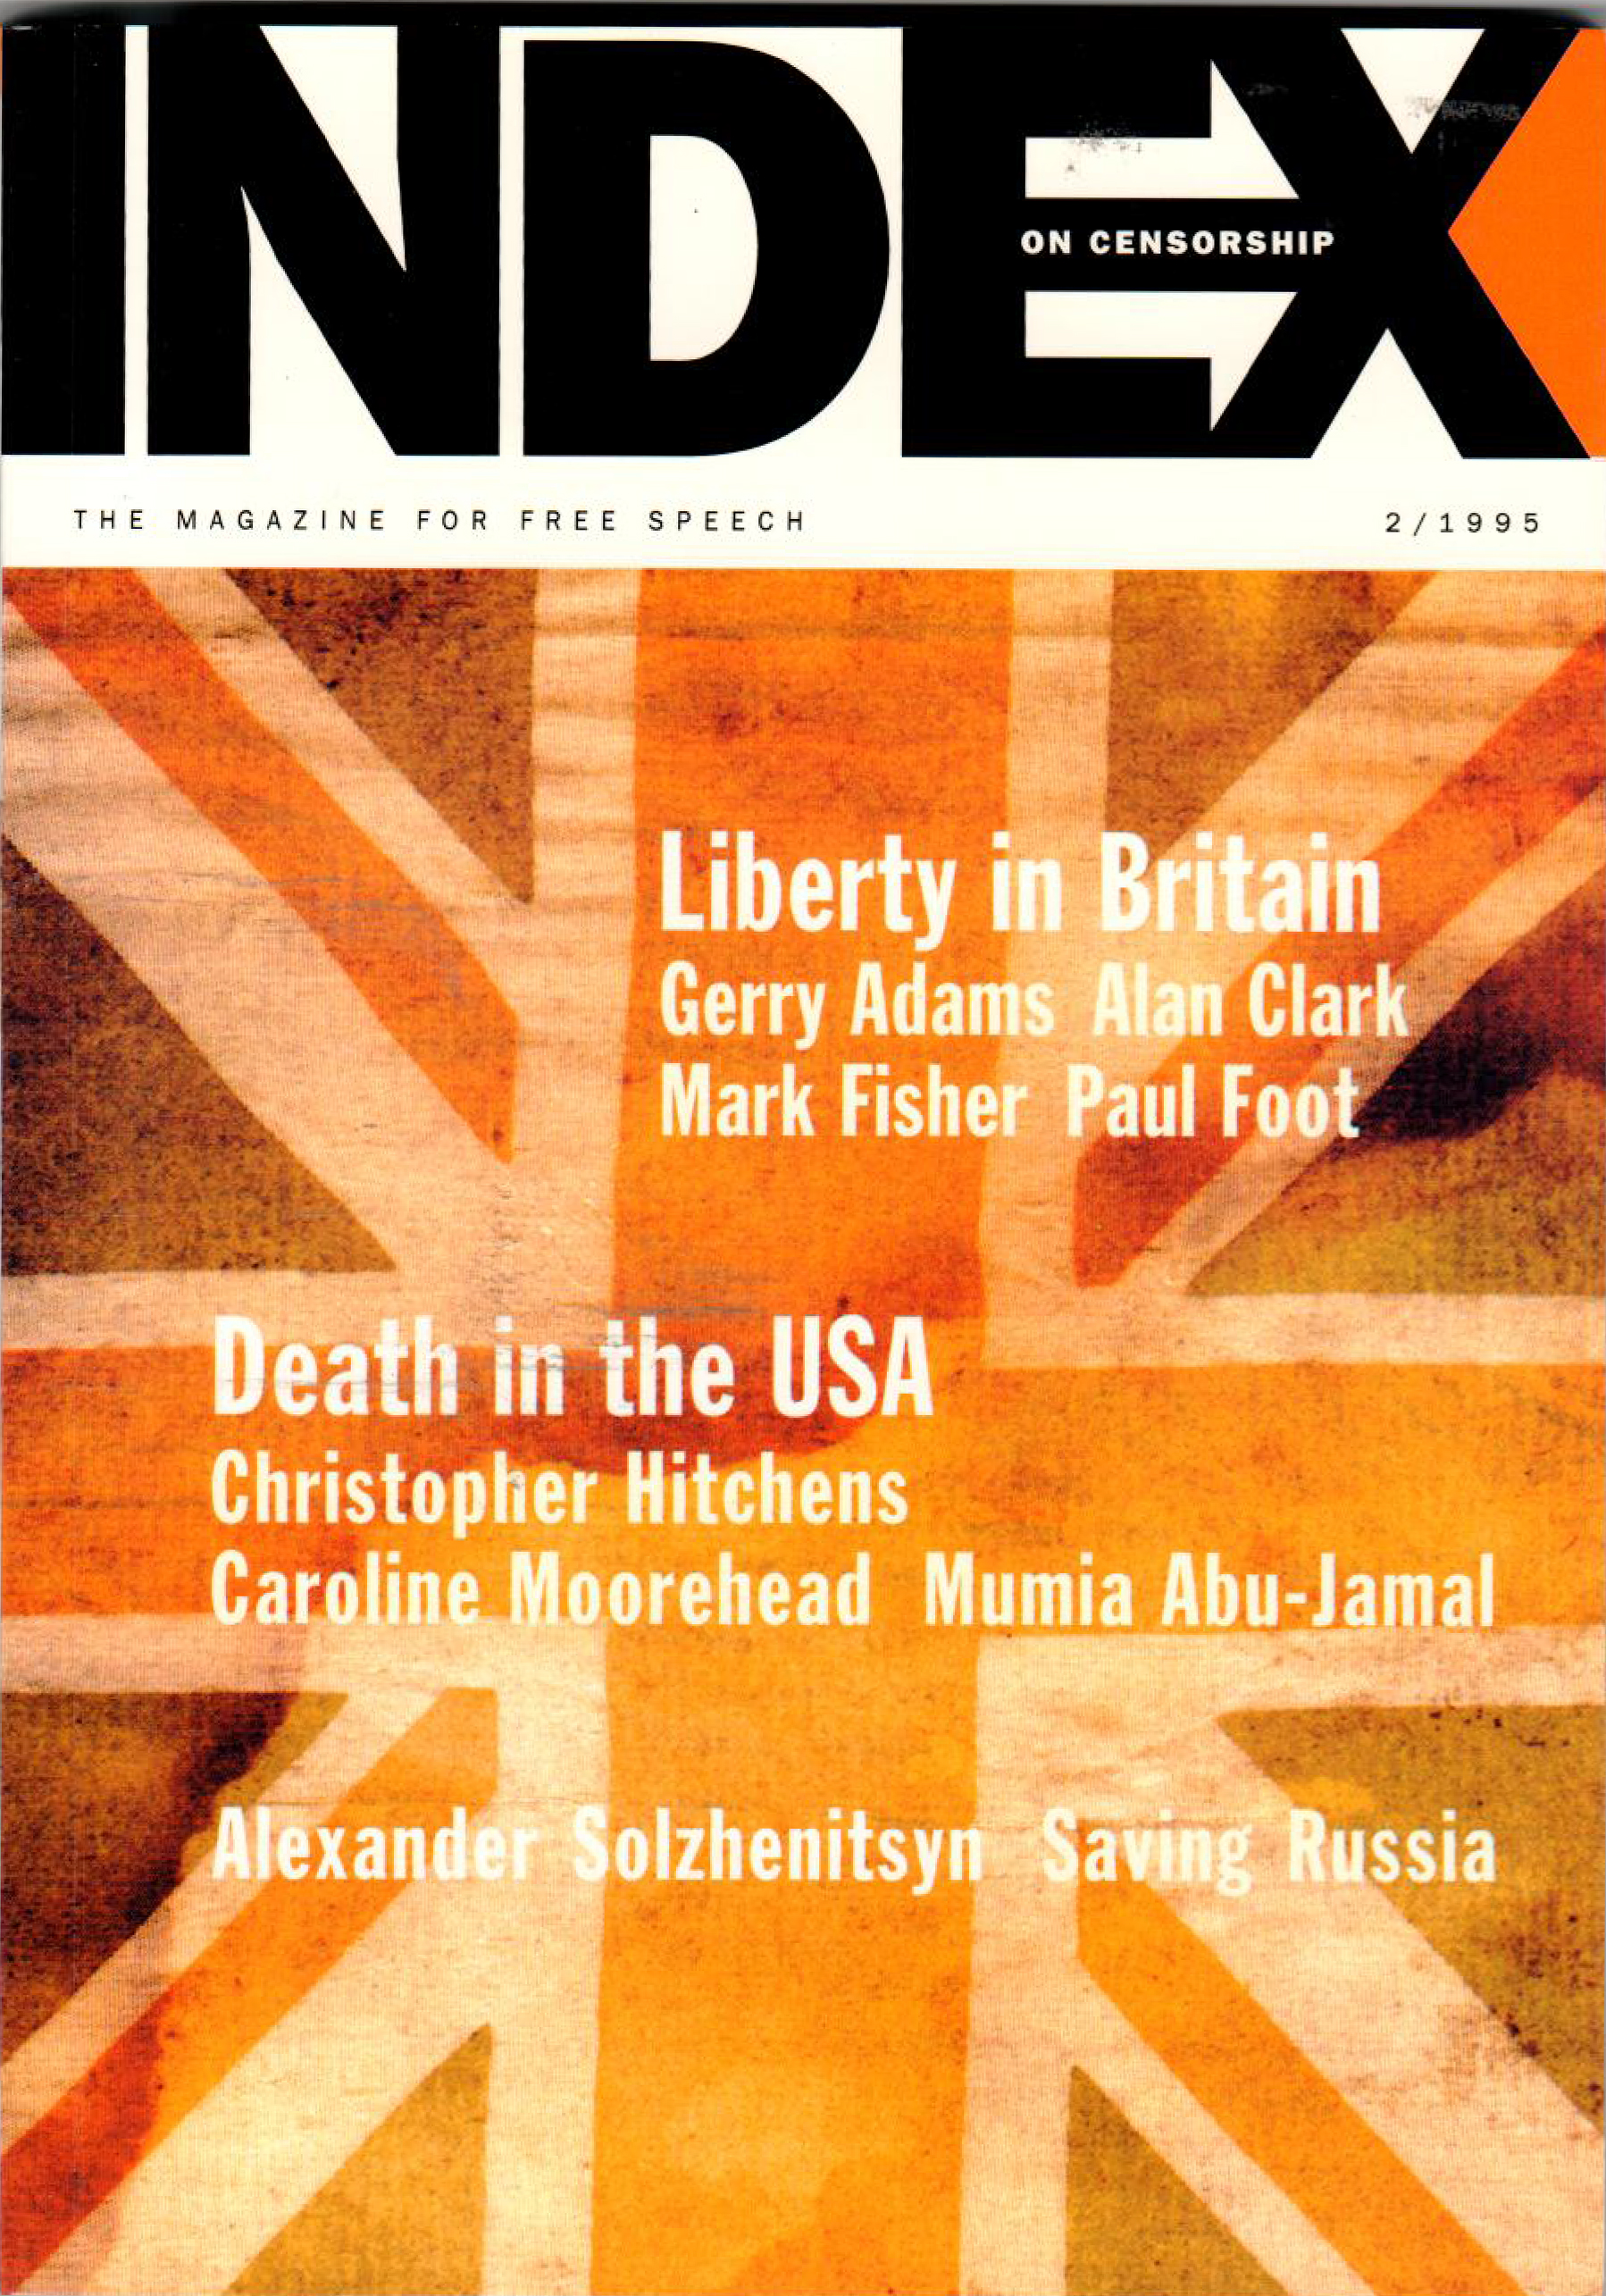 Liberty in Britain, the March 1995 issue of Index on Censorship magazine.